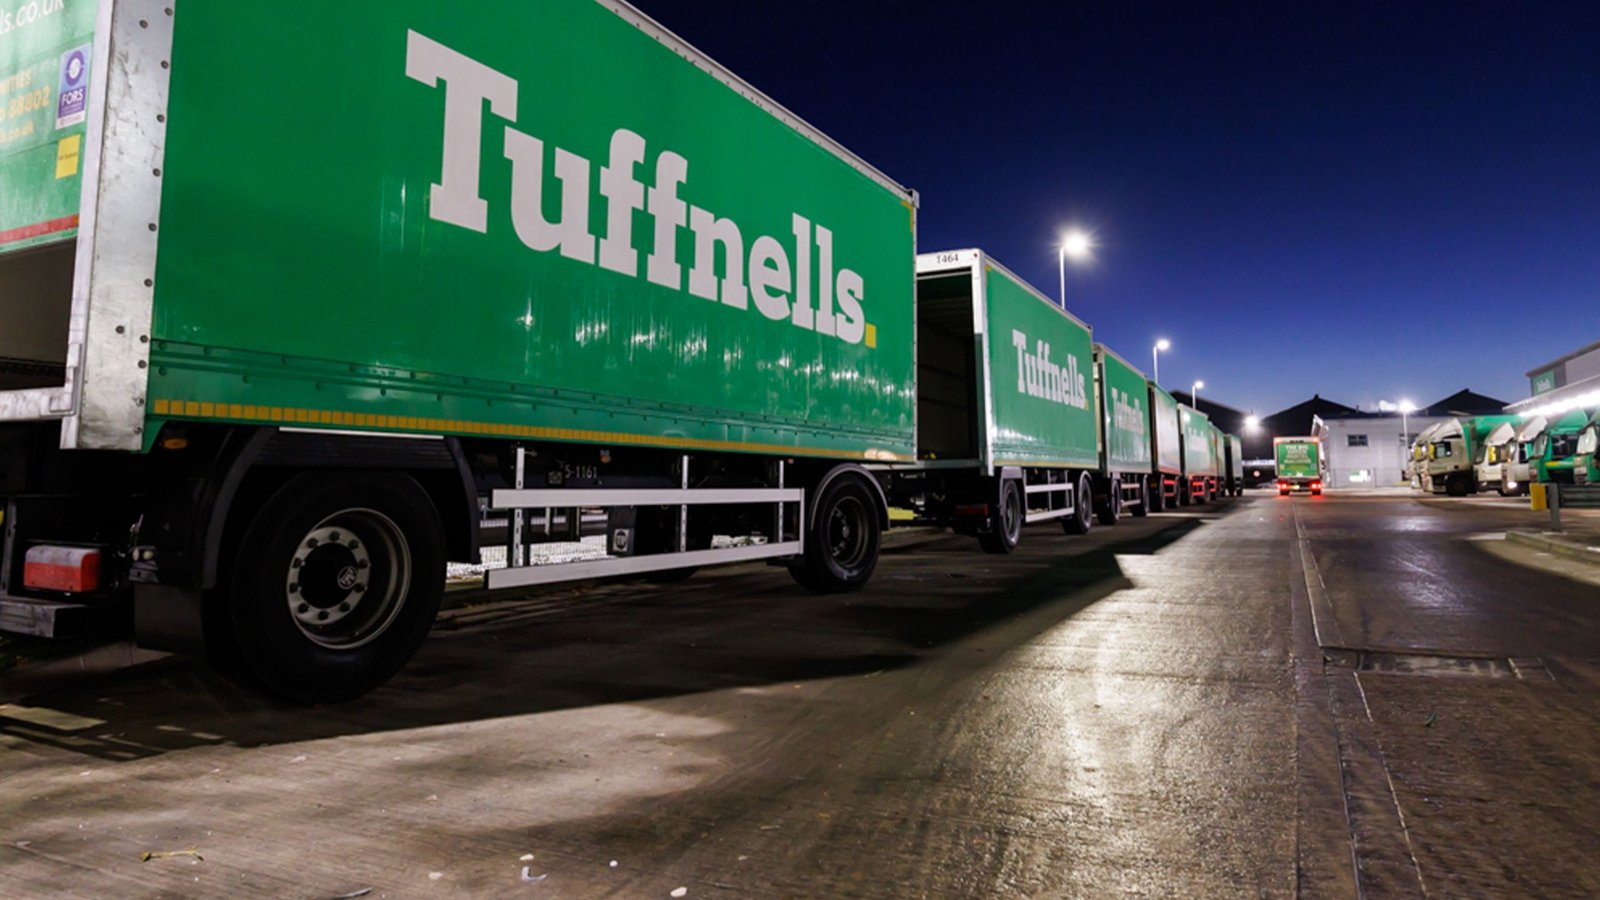 The Tuffnells Freight Carrier Story